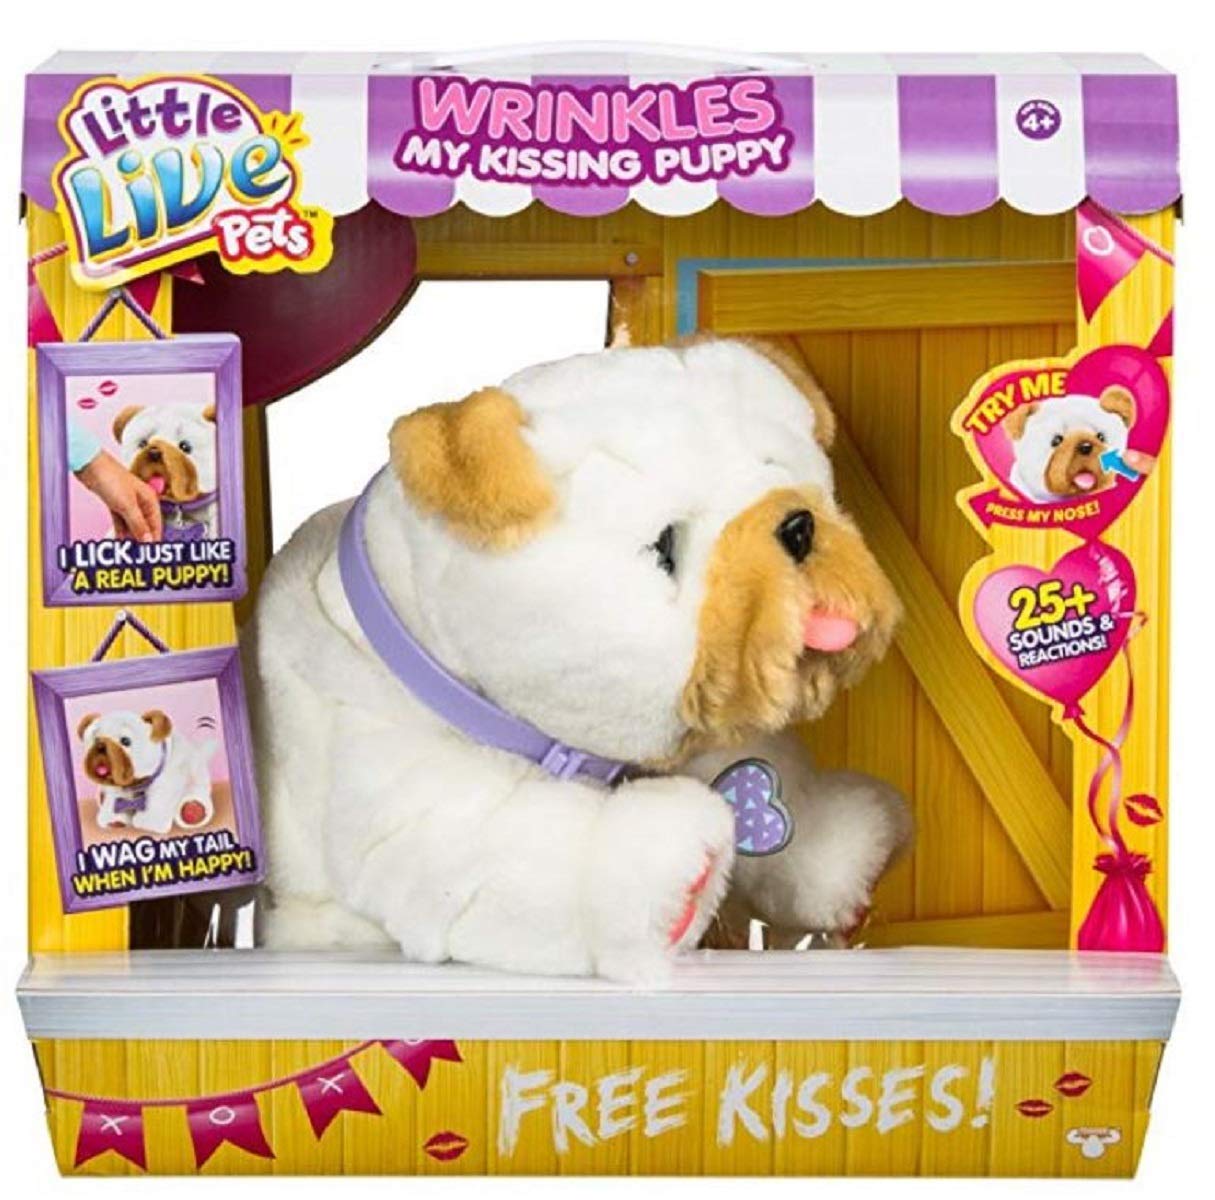 Little Live Pets My Kissing Puppy was $54.99, NOW $28.86 ...